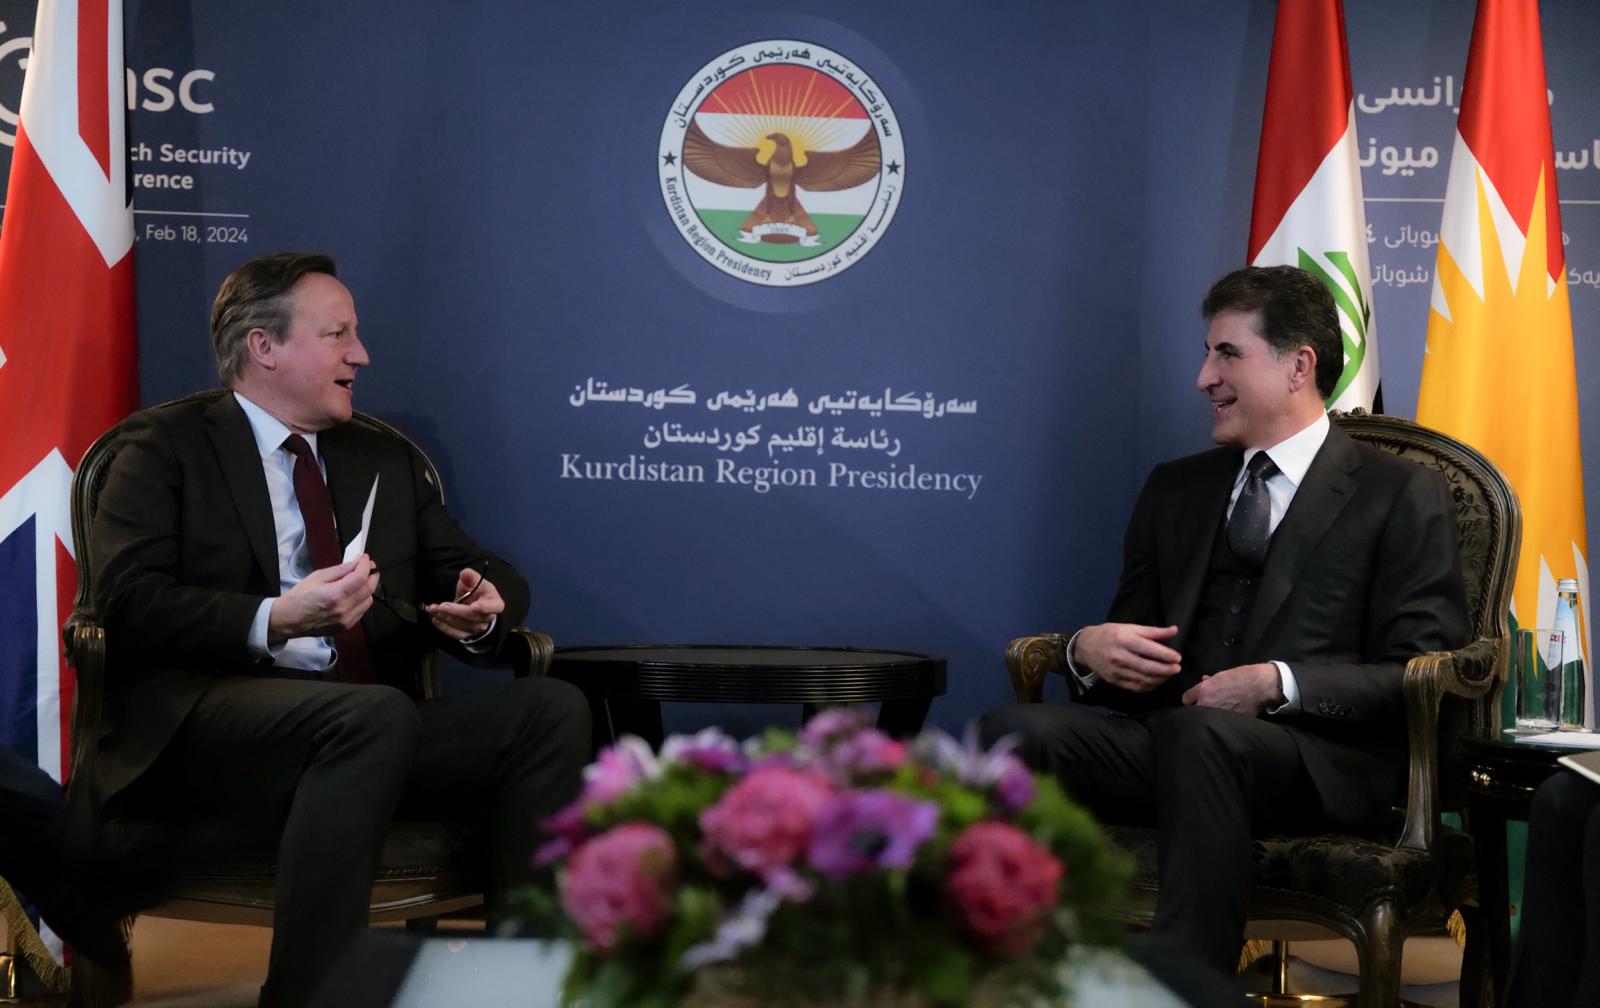 Nechirvan Barzani and David Cameron warn of risk of further escalation of tensions in the region